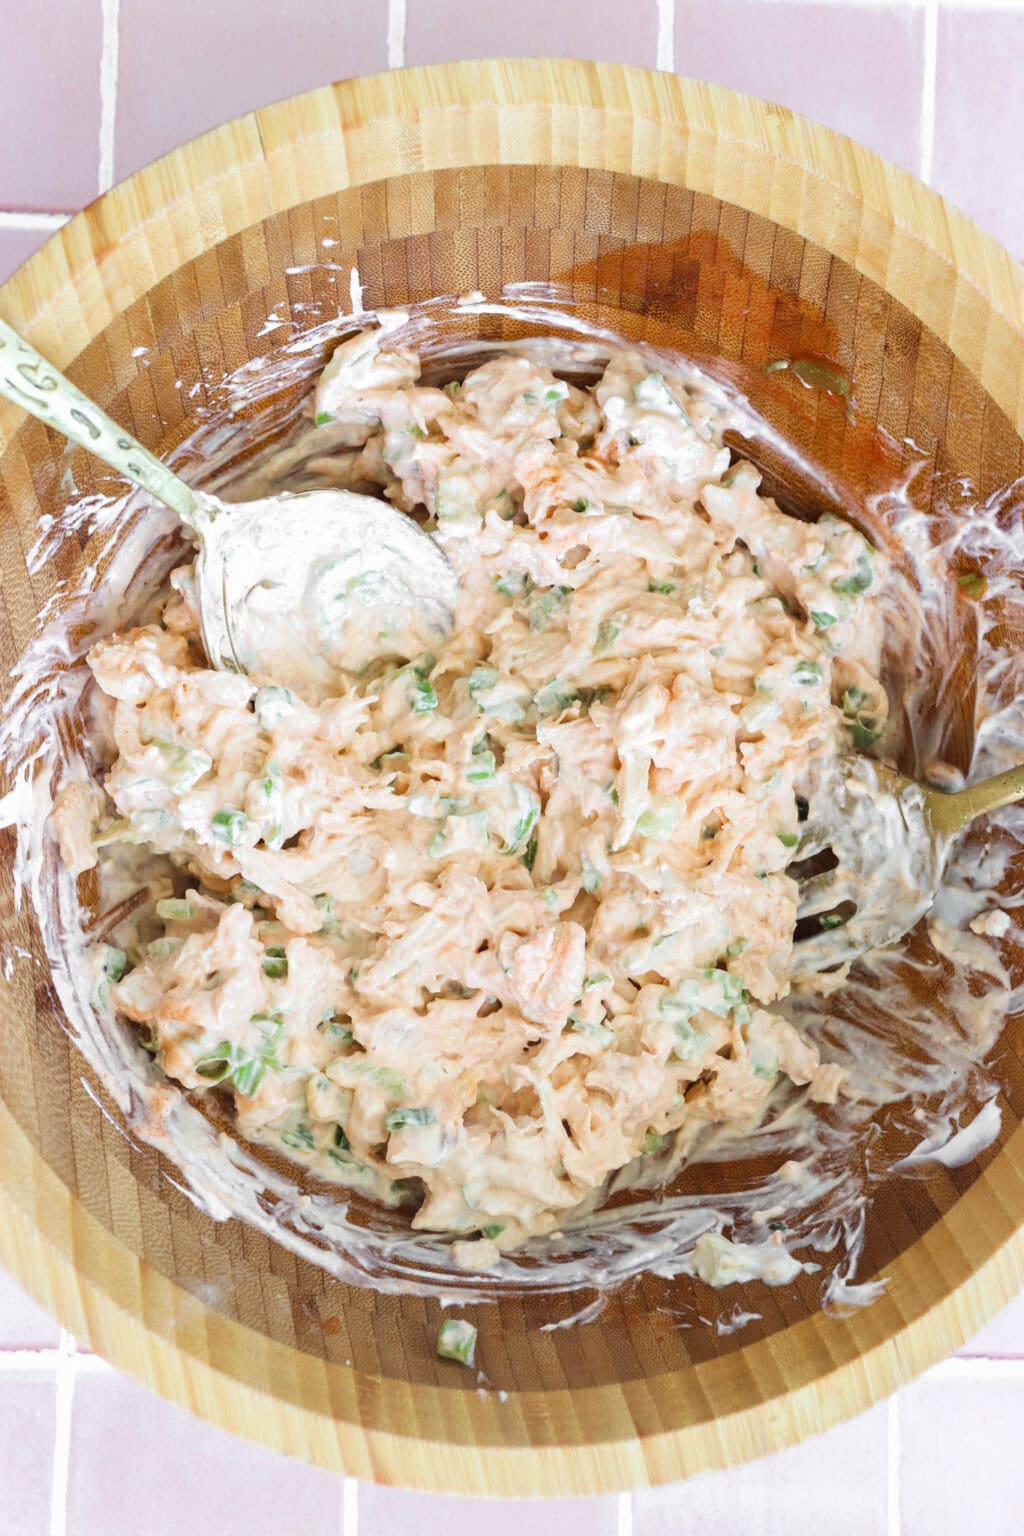 Ingredients for Quick Buffalo Chicken Salad with Greek Yogurt mixed in a medium wooden bowl including cooked shredded chicken, Greek yogurt, mayo, Frank's Red Hot Original Sauce, garlic powder, green onions, blue cheese, pepper